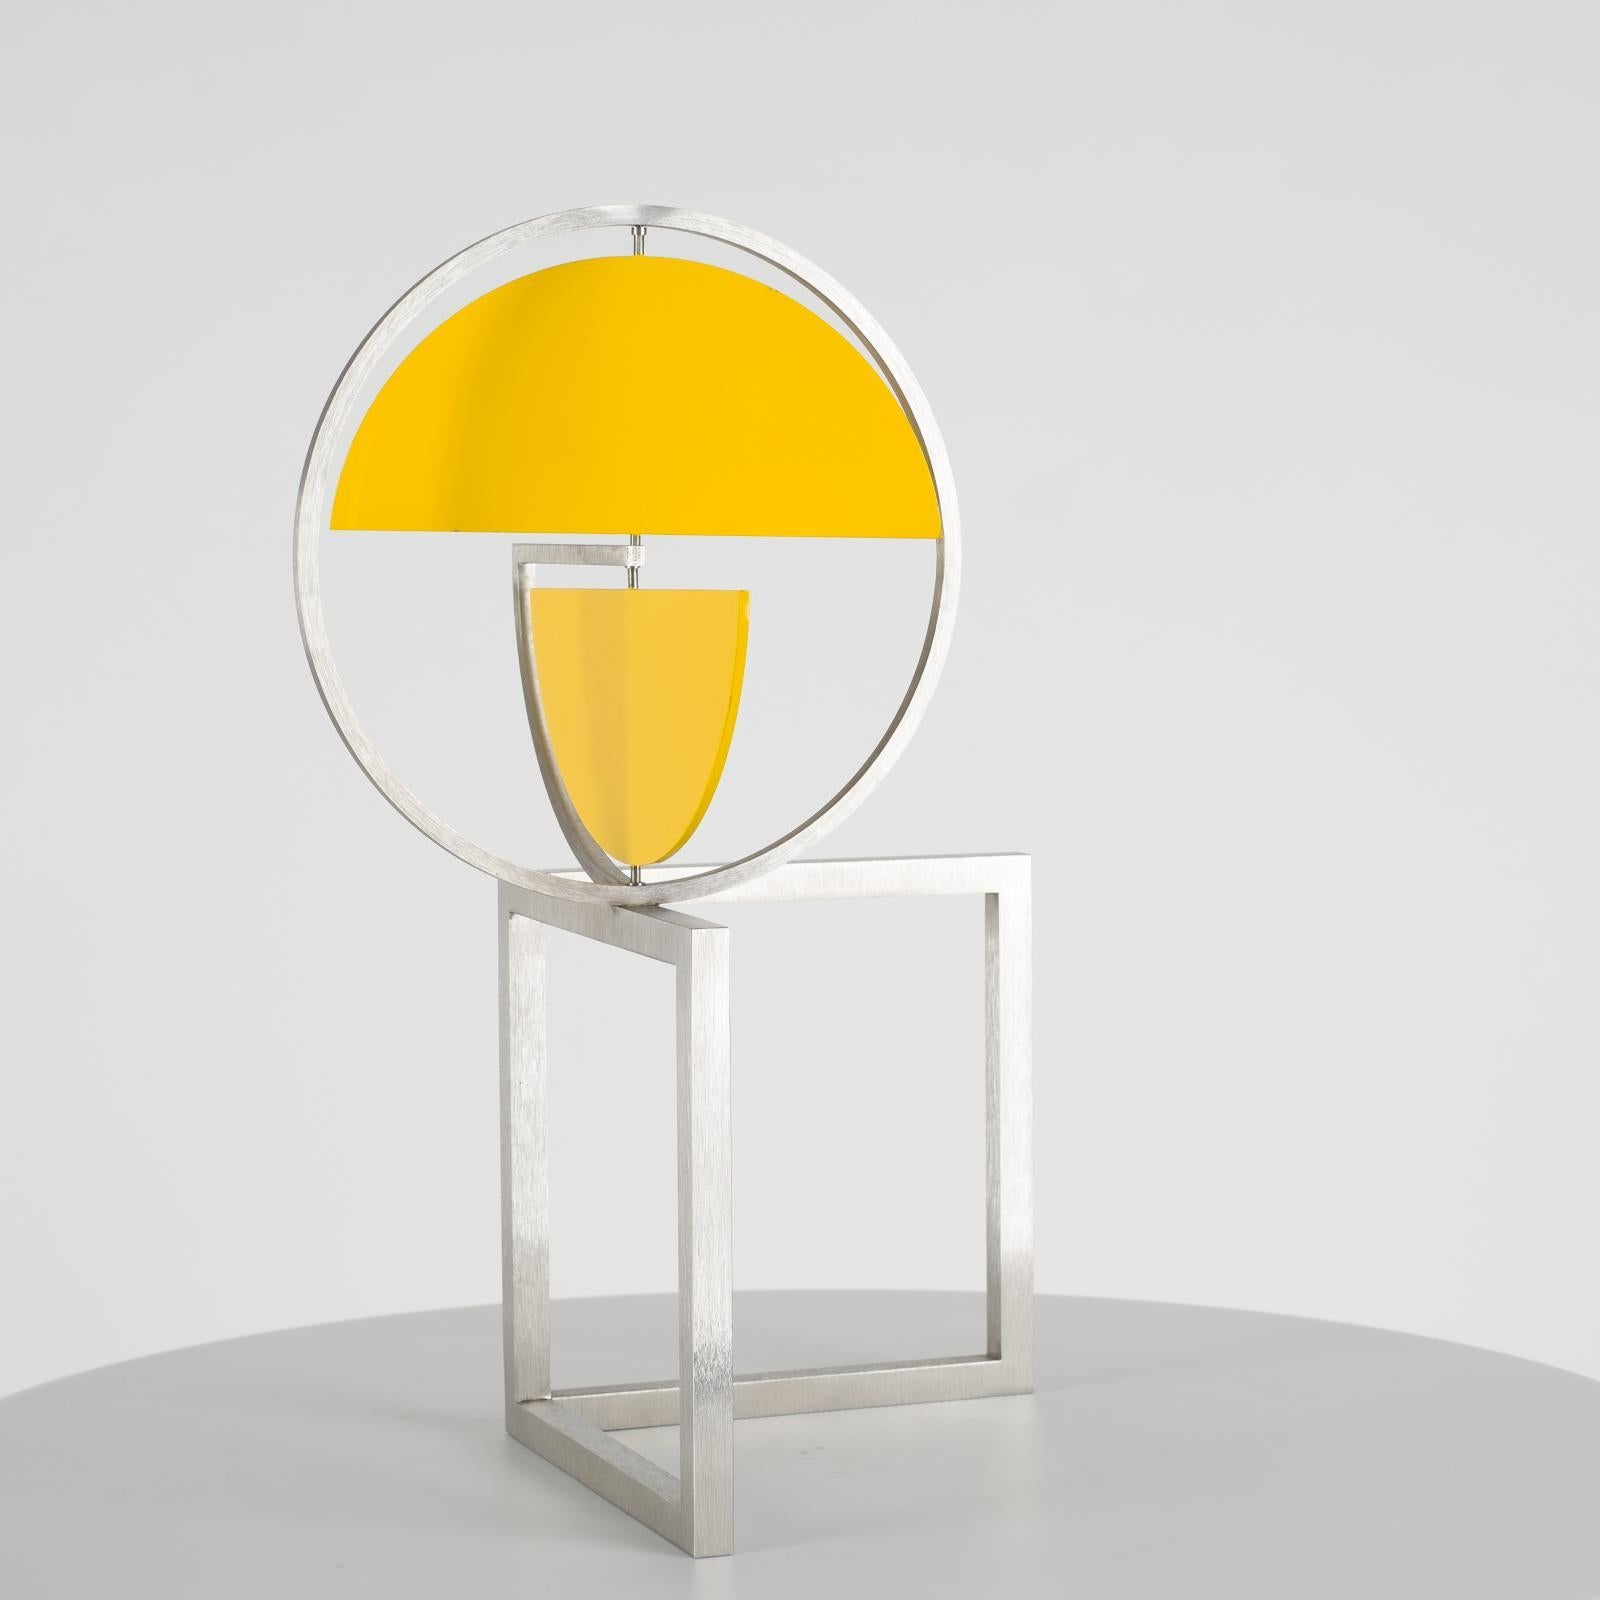 Yellow Disc on Two Squares, kinetic sculpture - Sculpture by Roger Phillips